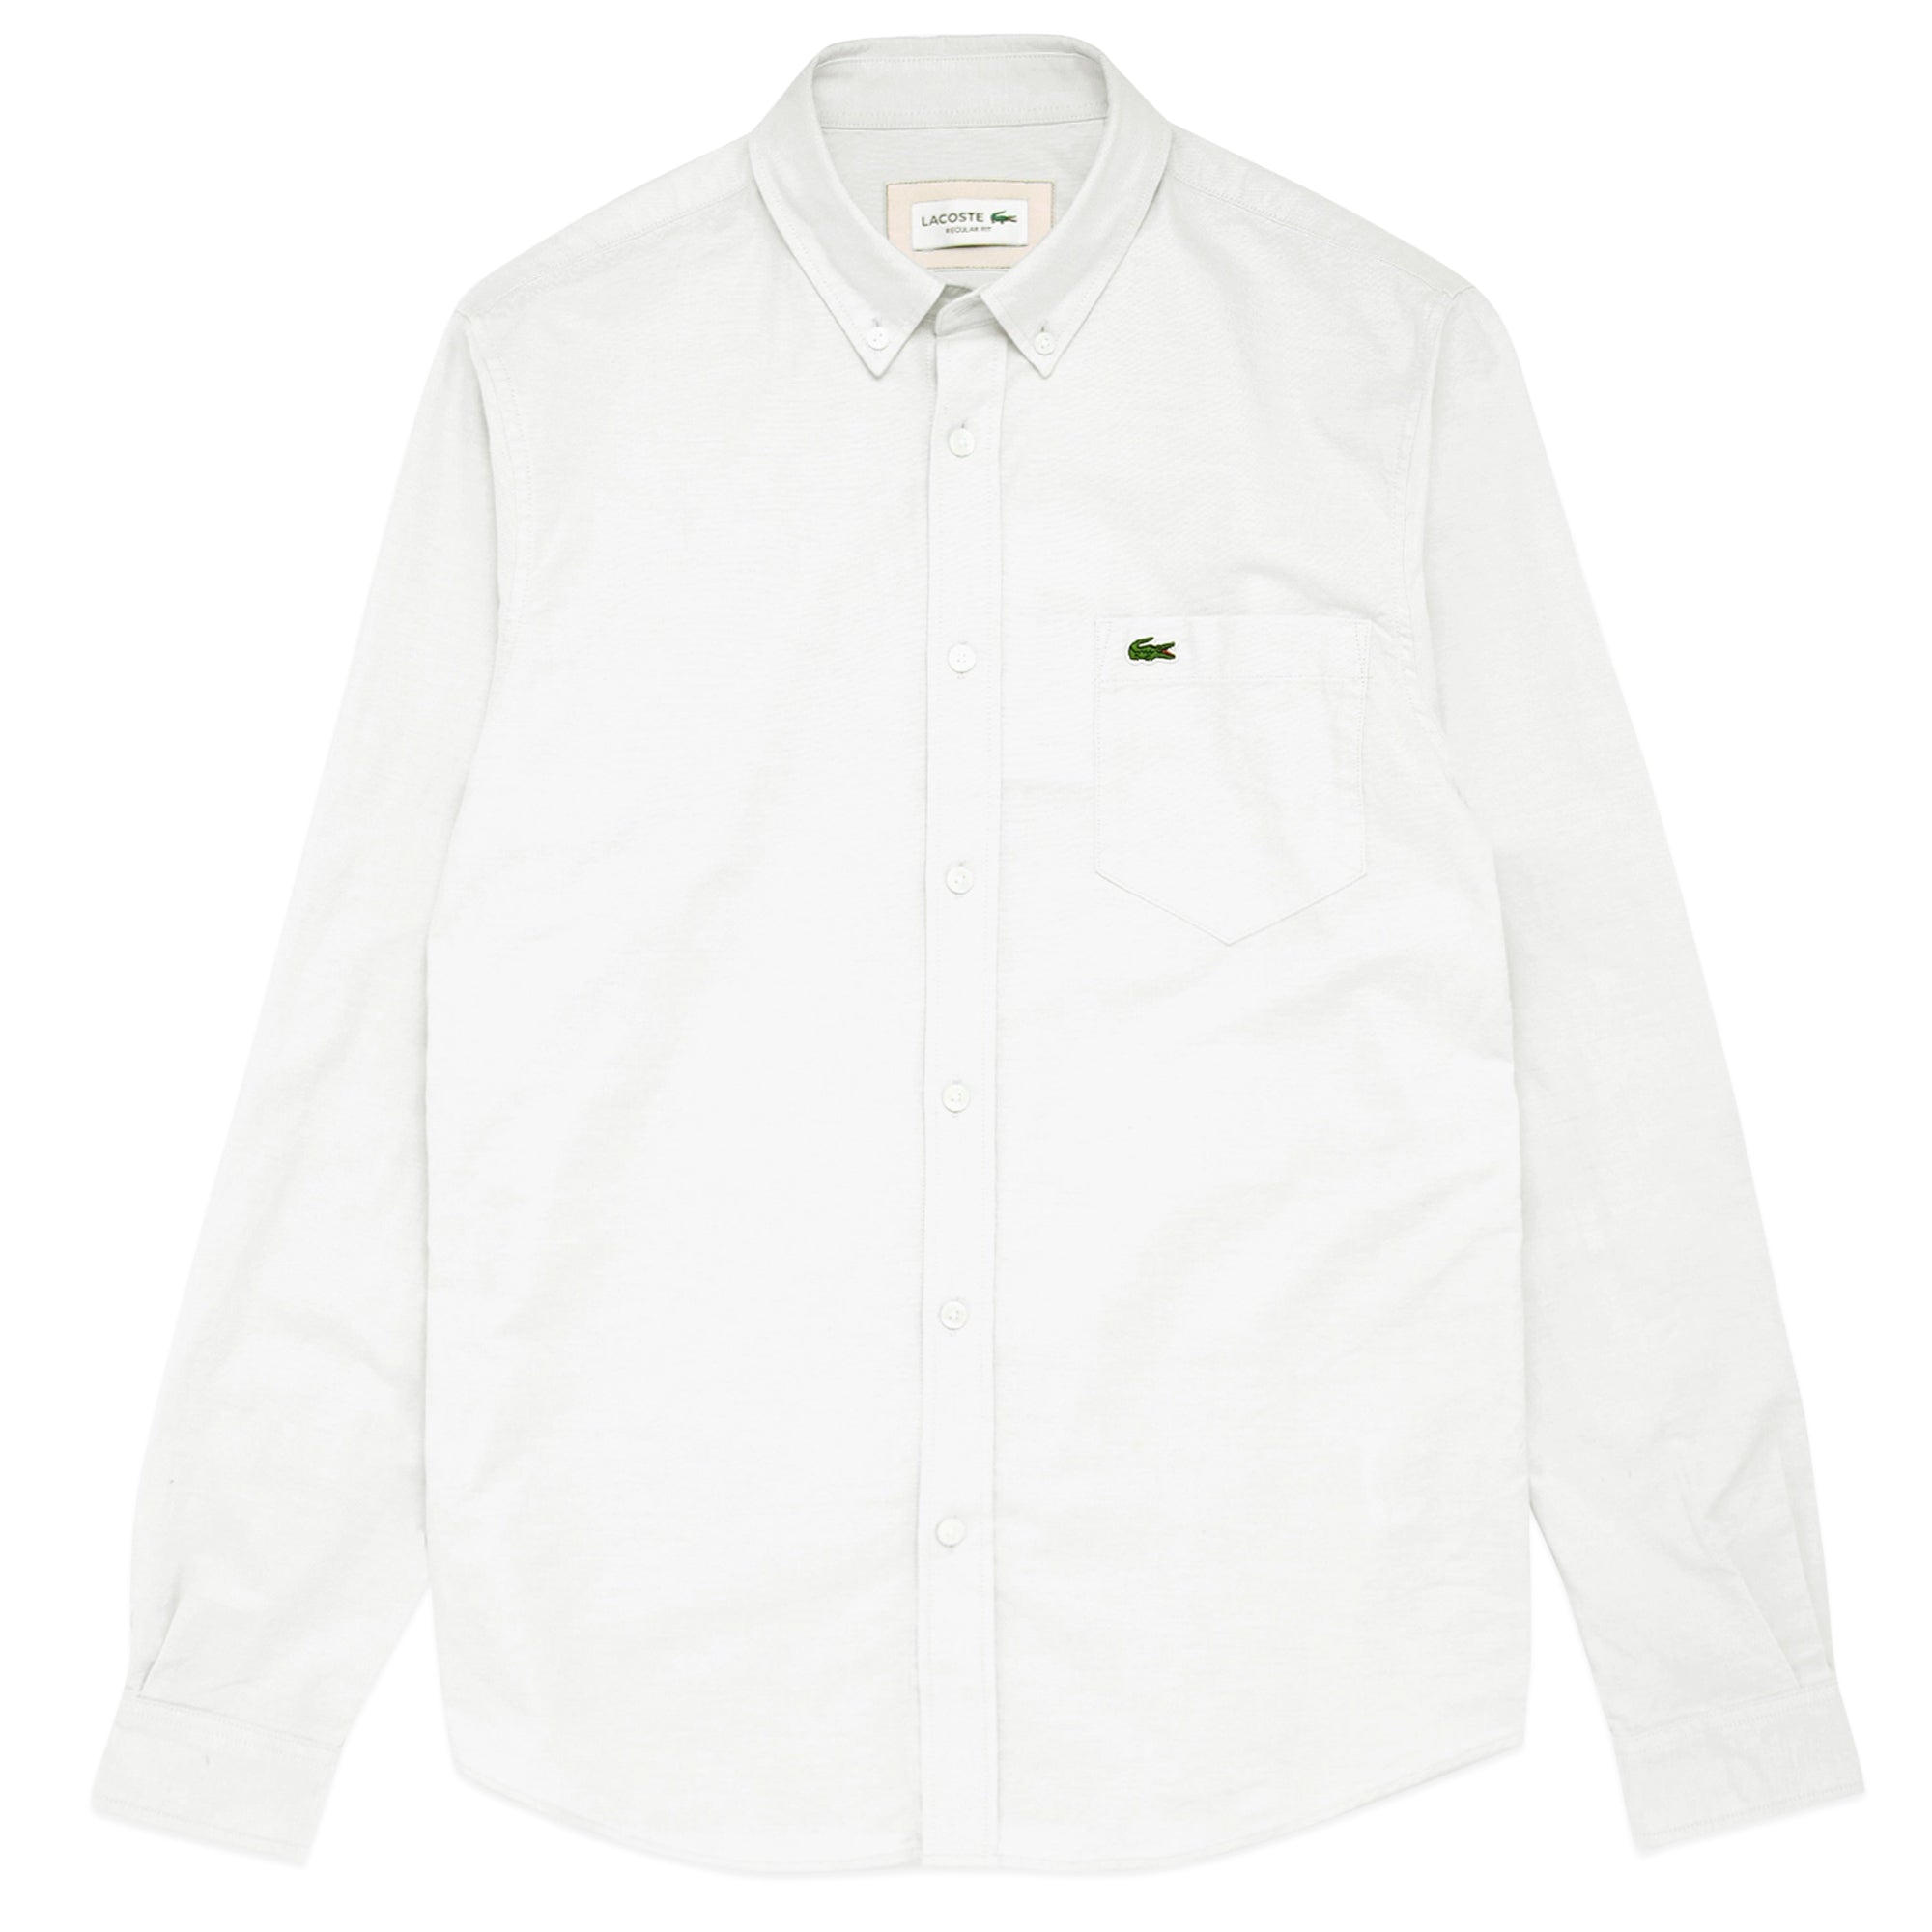 Lacoste Long Sleeve Casual Shirt CH0204 - White